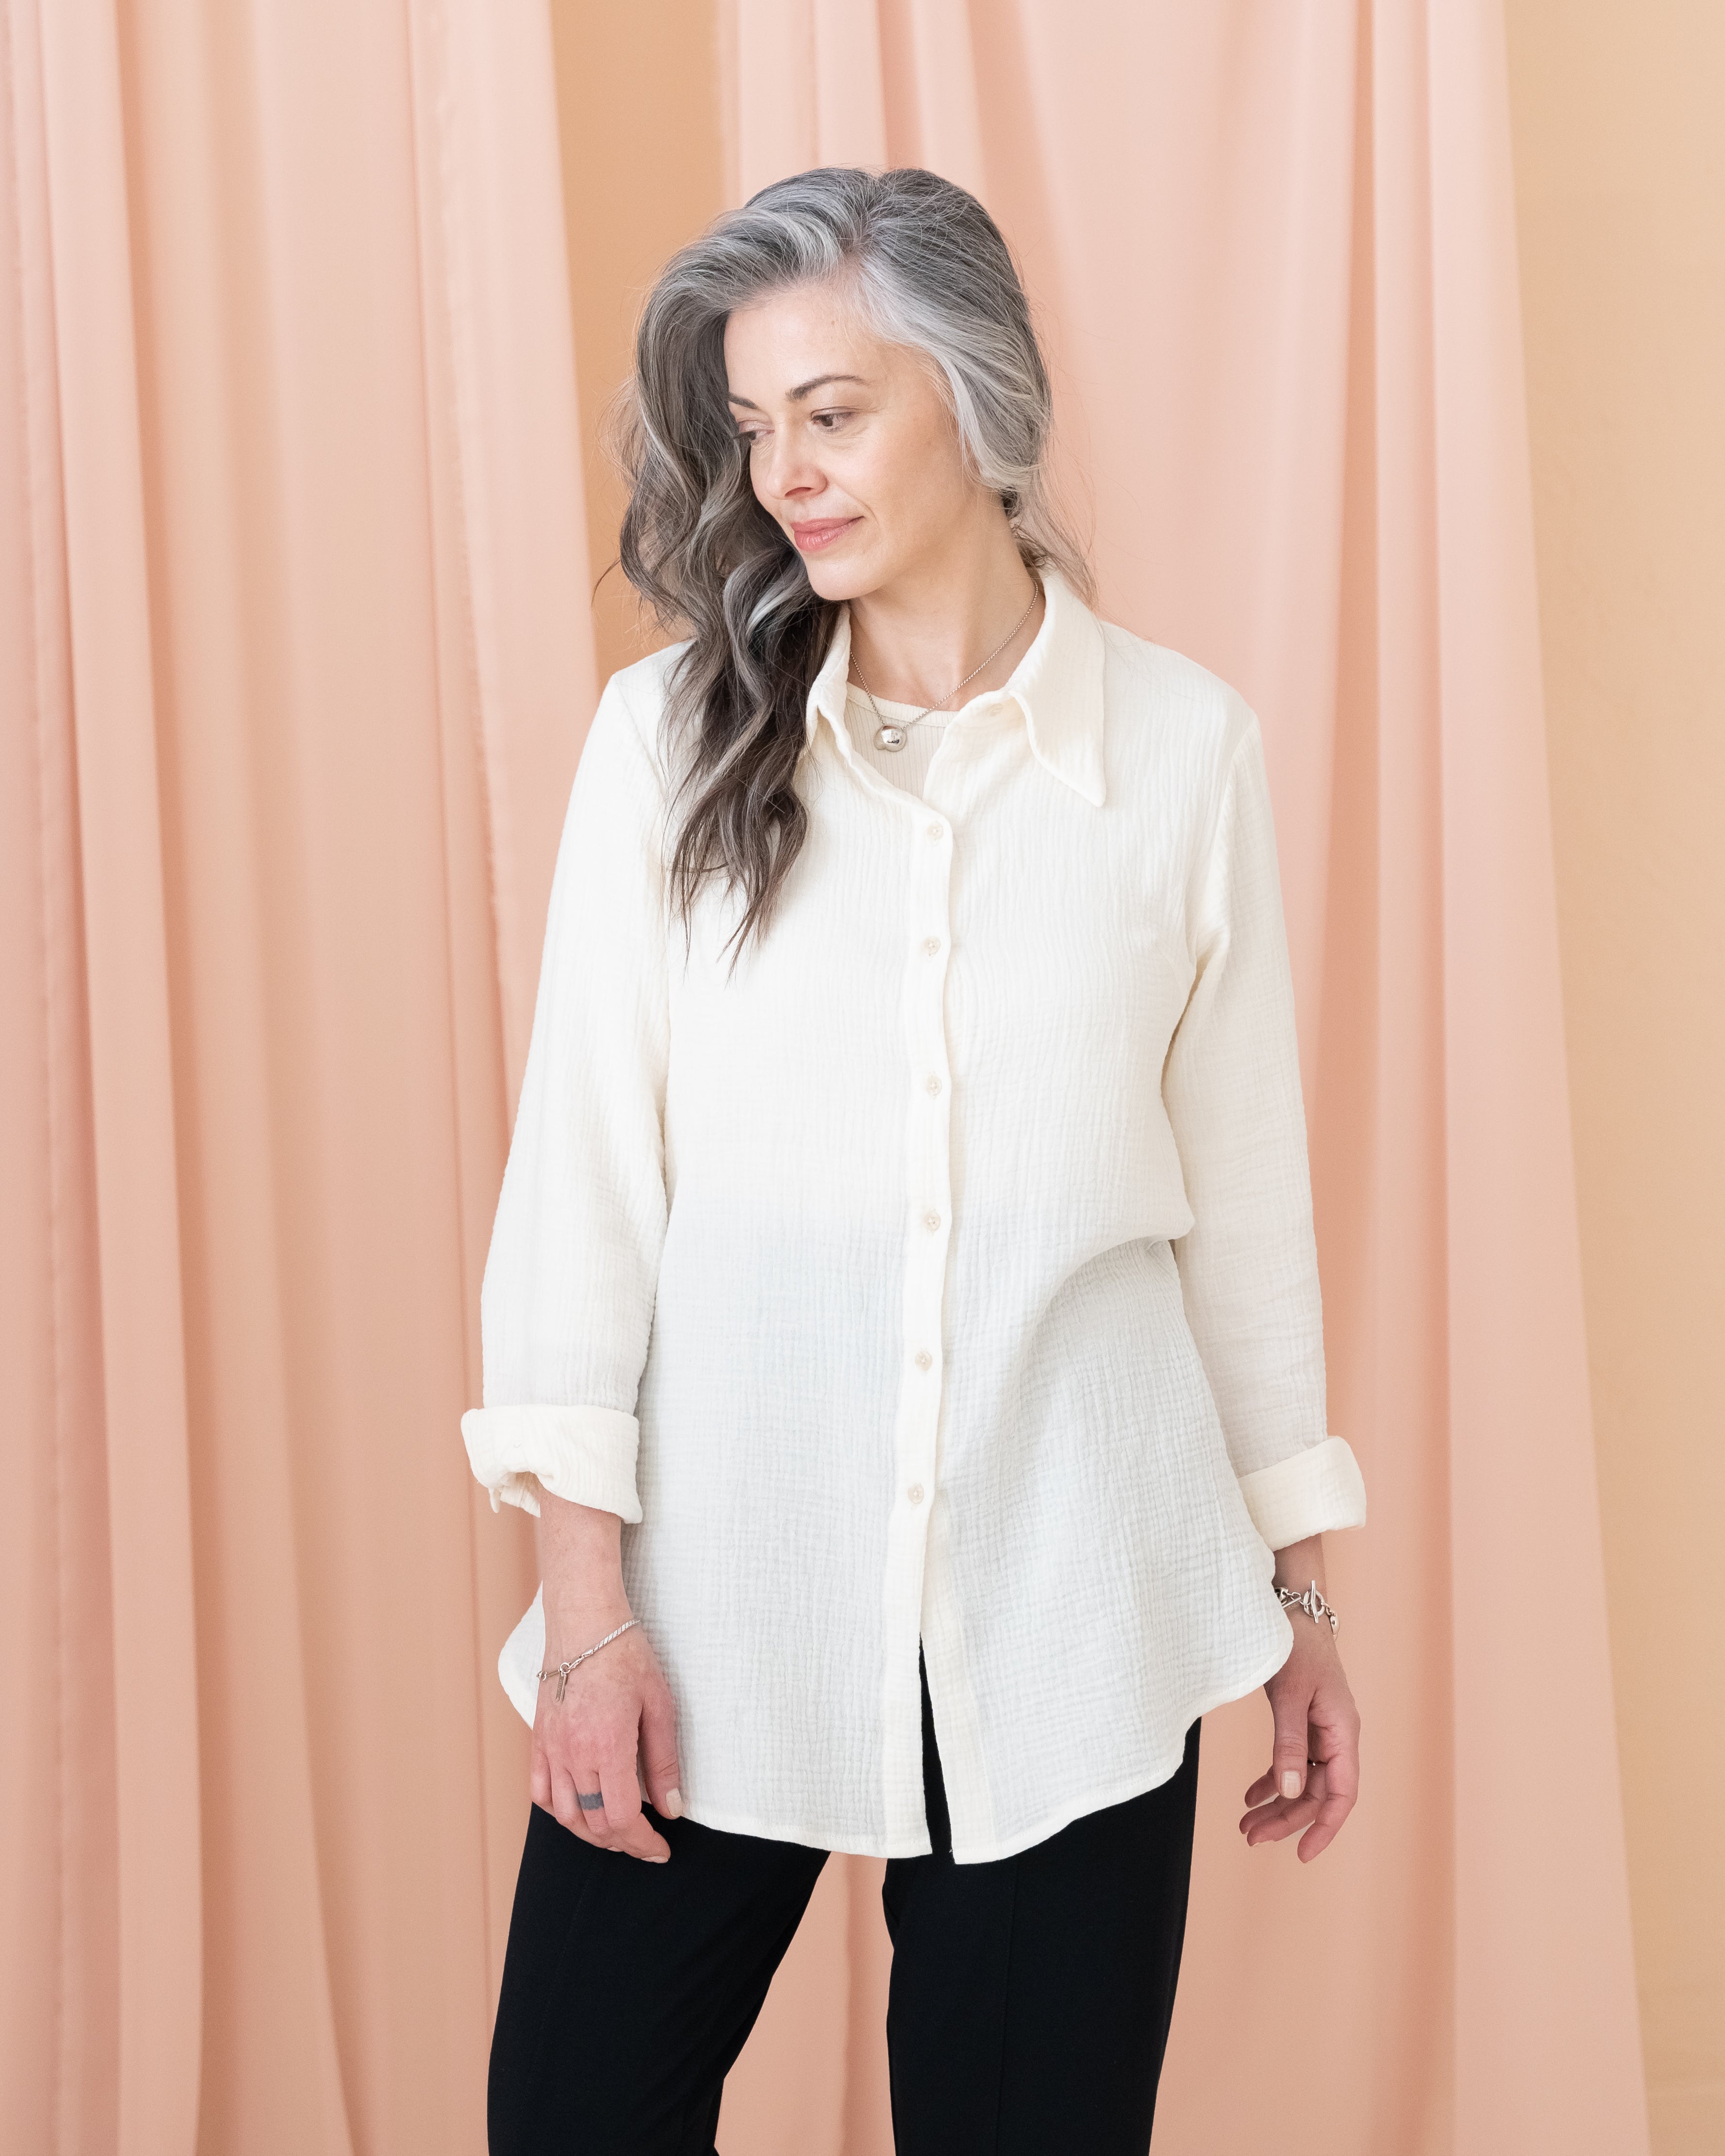 Styling an Oversized Button-Up Shirt: Comprehensive Capsule Wardrobe Guide for Chic Dressing